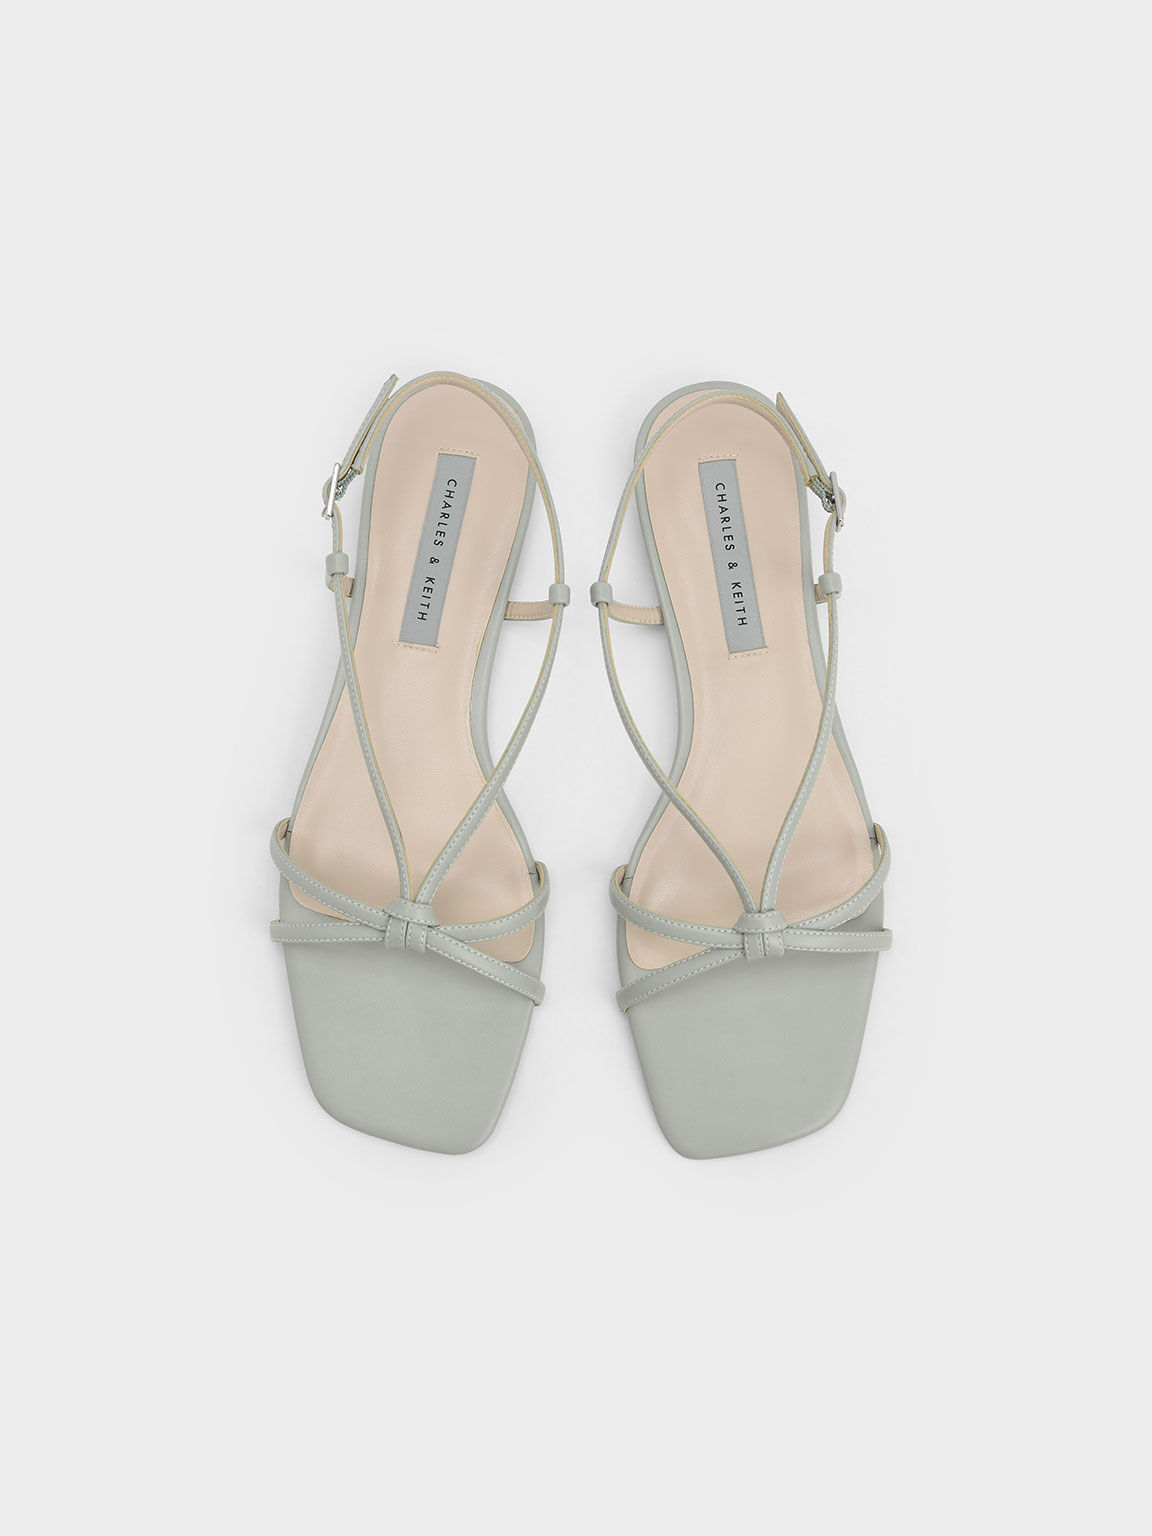 Strappy Knotted Slingback Flat Sandals, Mint Green, hi-res